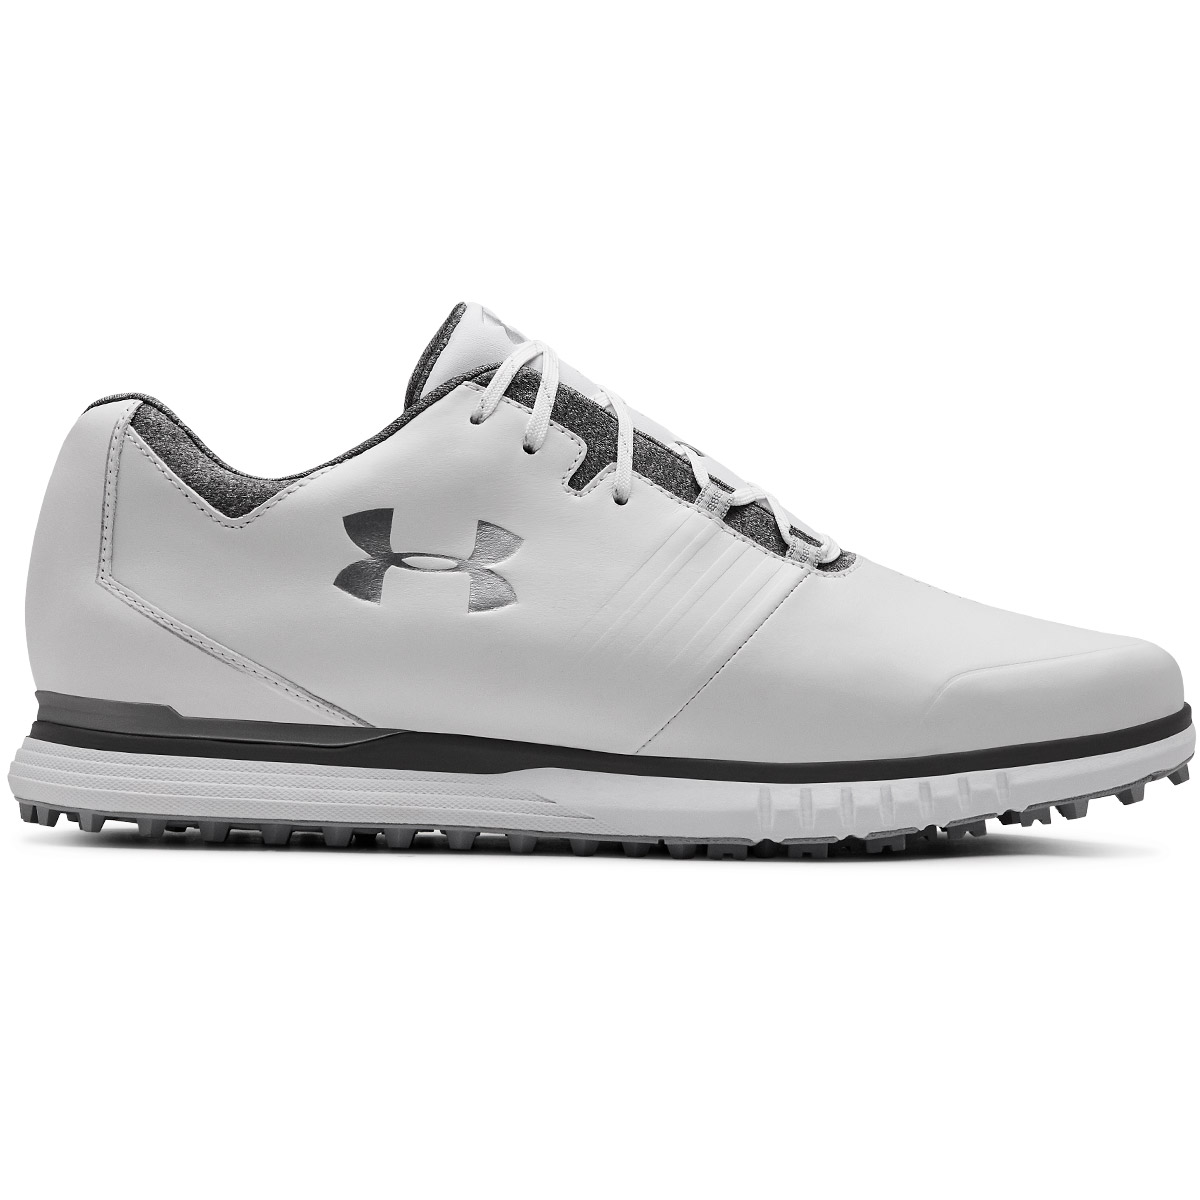 Under Armour Showdown SL Shoes from 